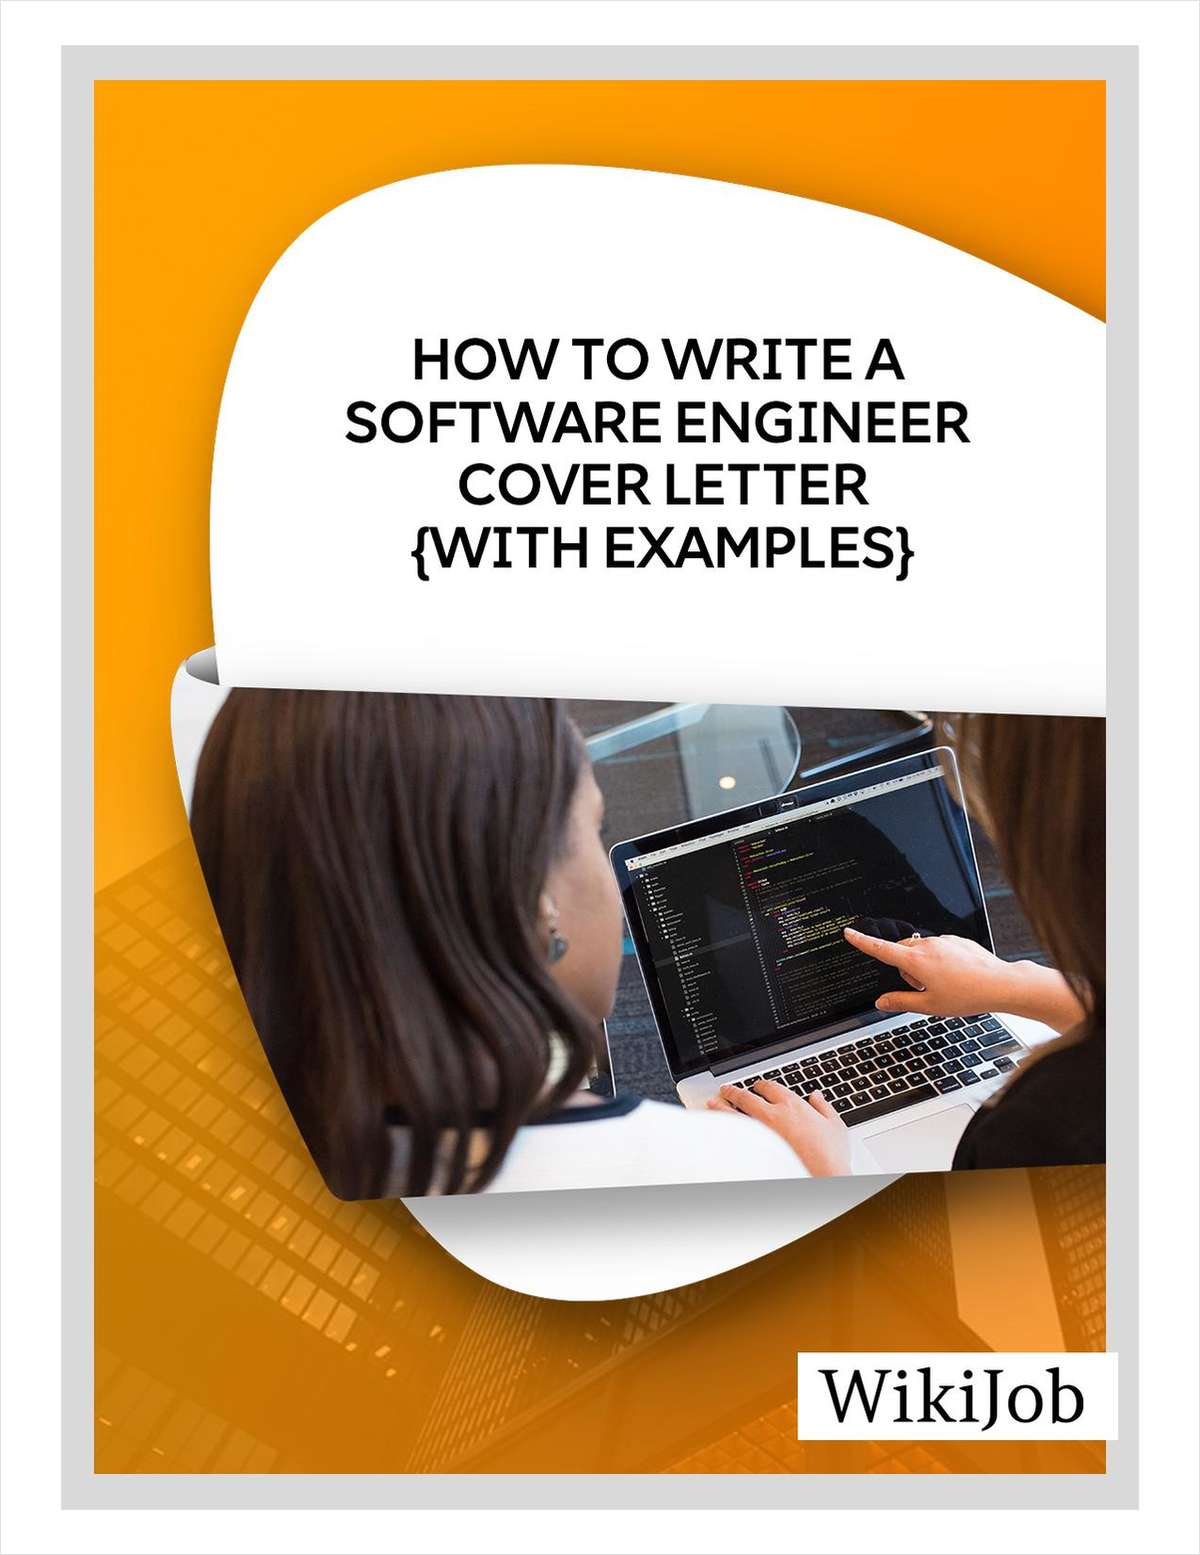 How to Write a Software Engineer Cover Letter